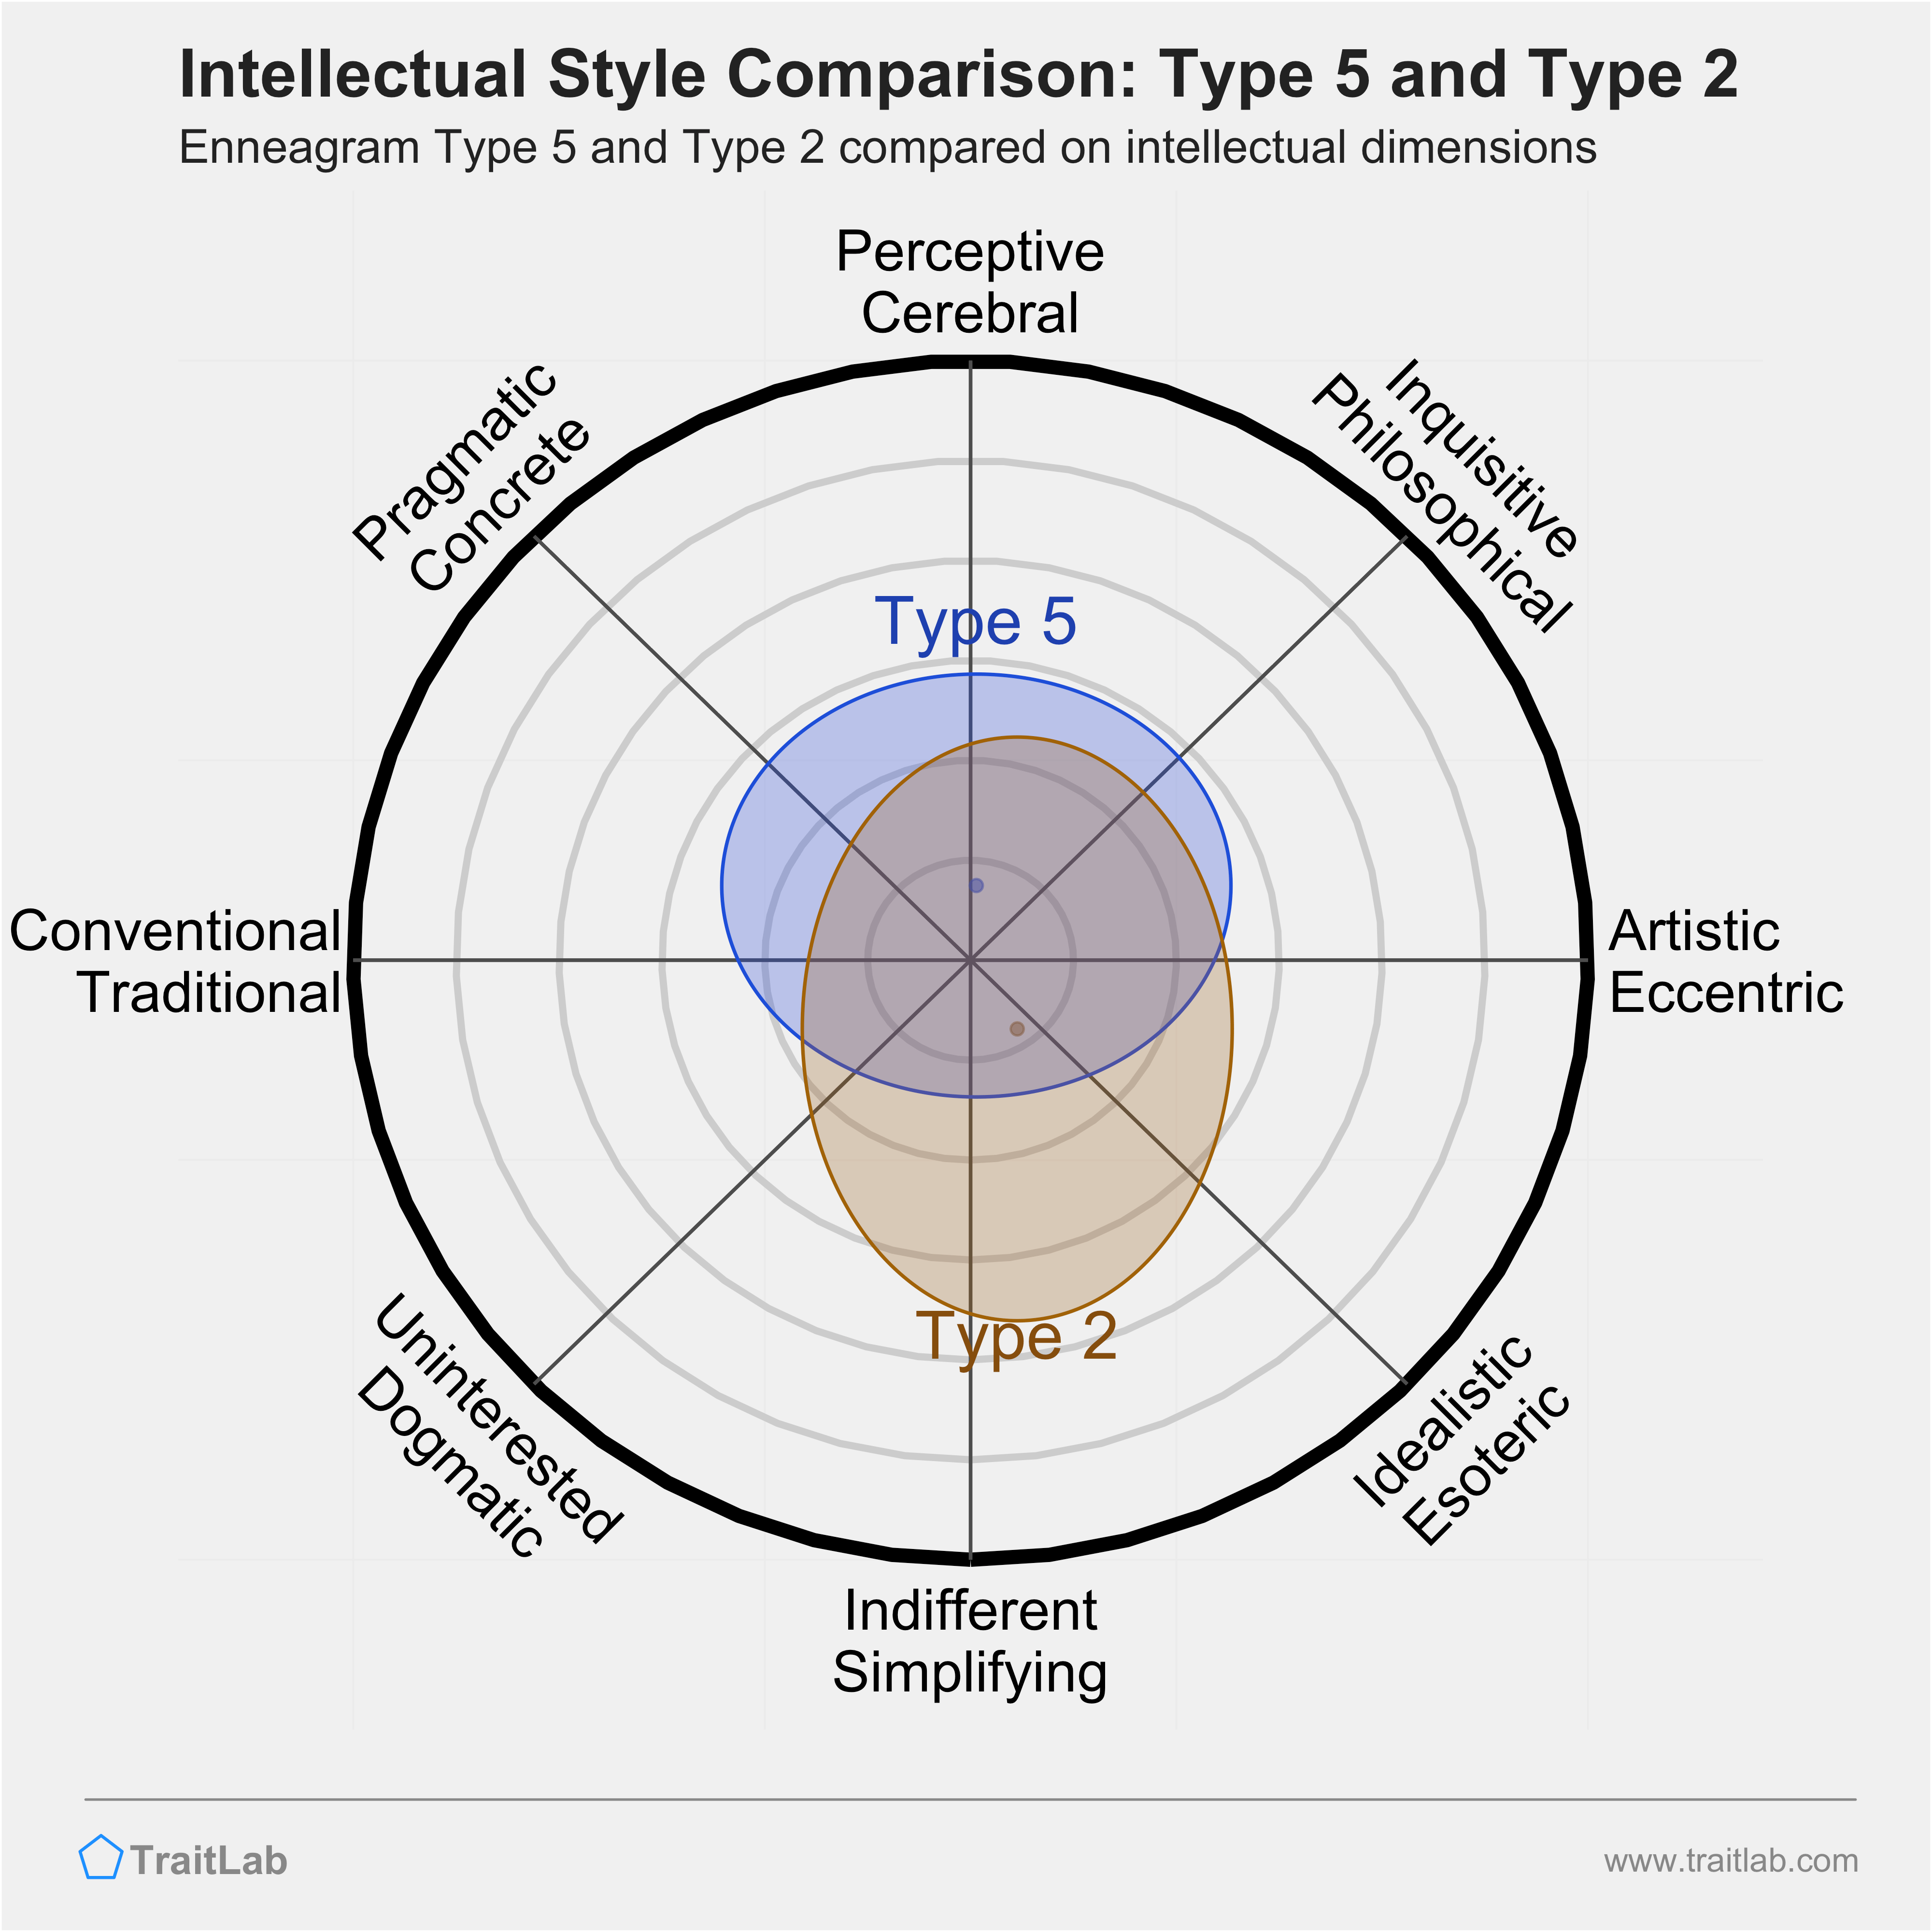 Type 5 and Type 2 comparison across intellectual dimensions